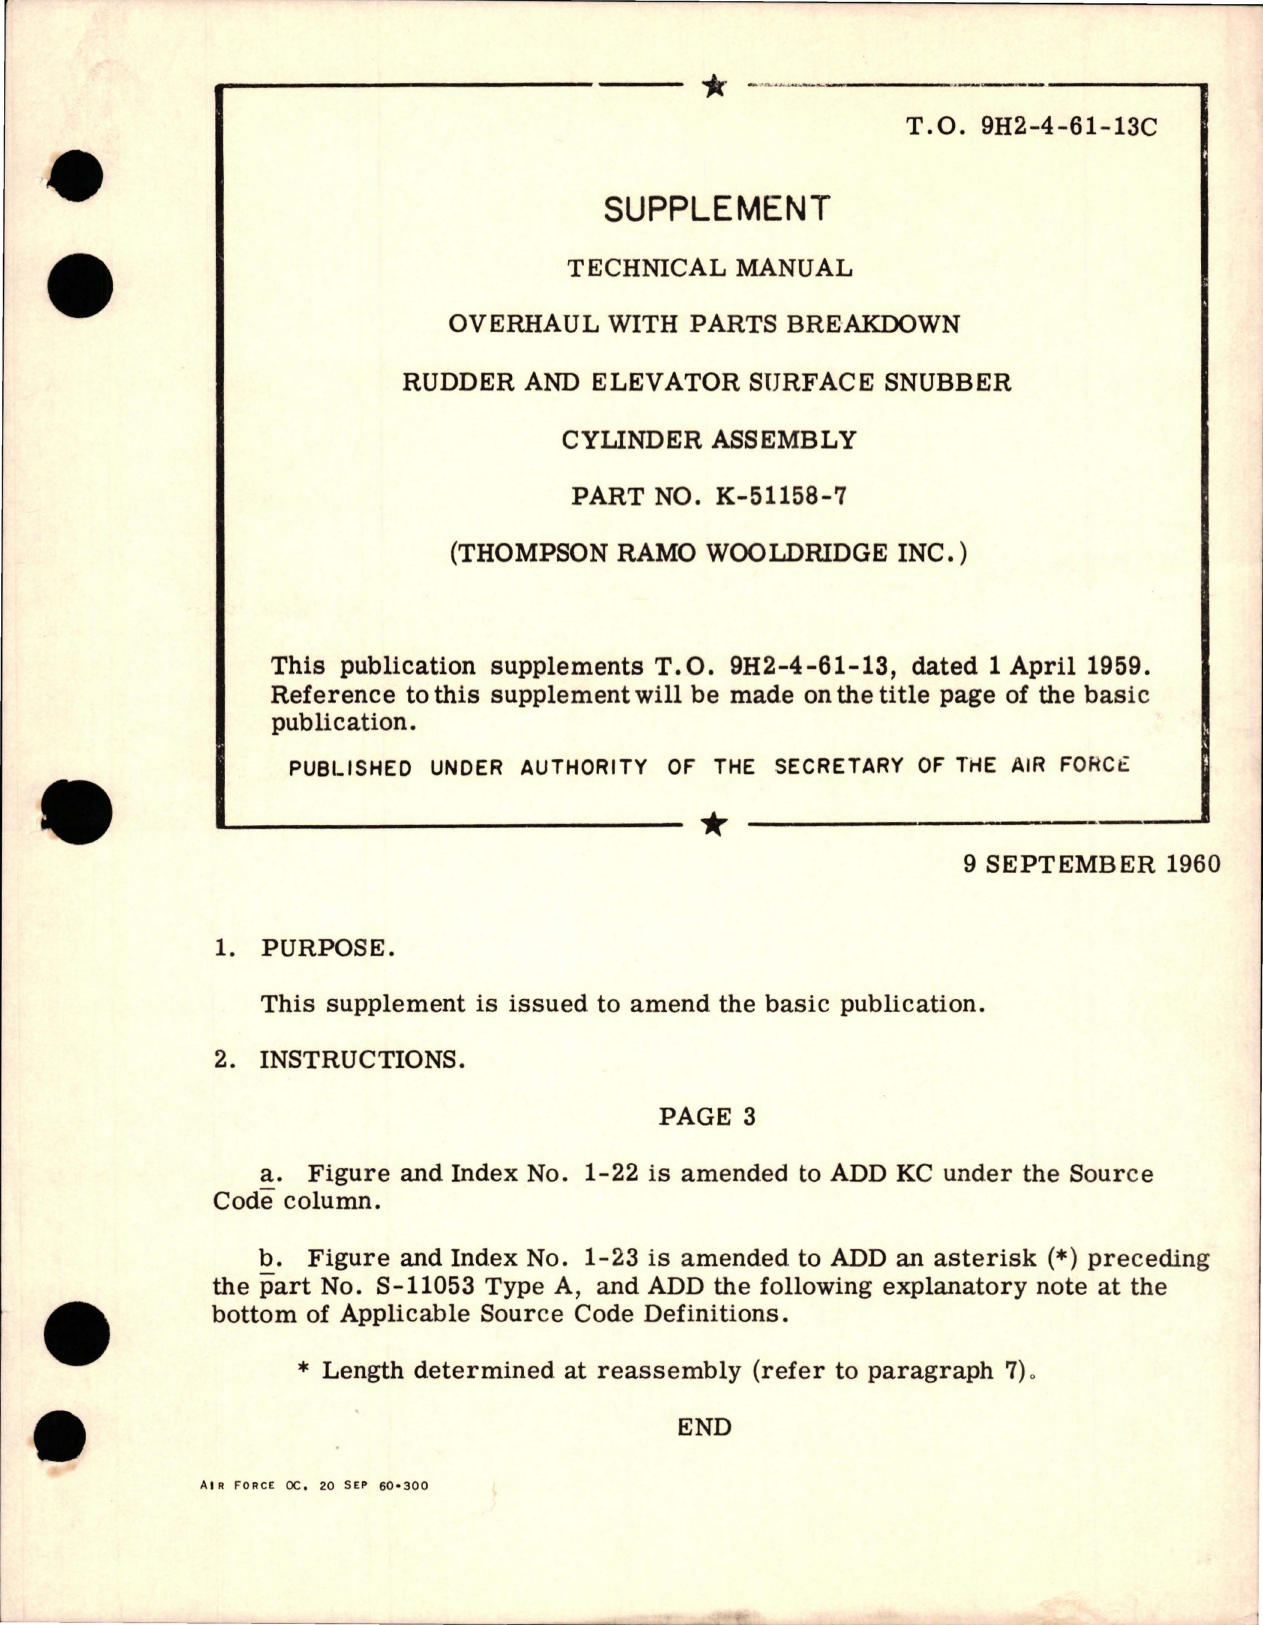 Sample page 1 from AirCorps Library document: Supplement to Overhaul with Parts Breakdown for Rudder and Elevator Surface Snubber Cylinder Assembly - Part K-51158-7 